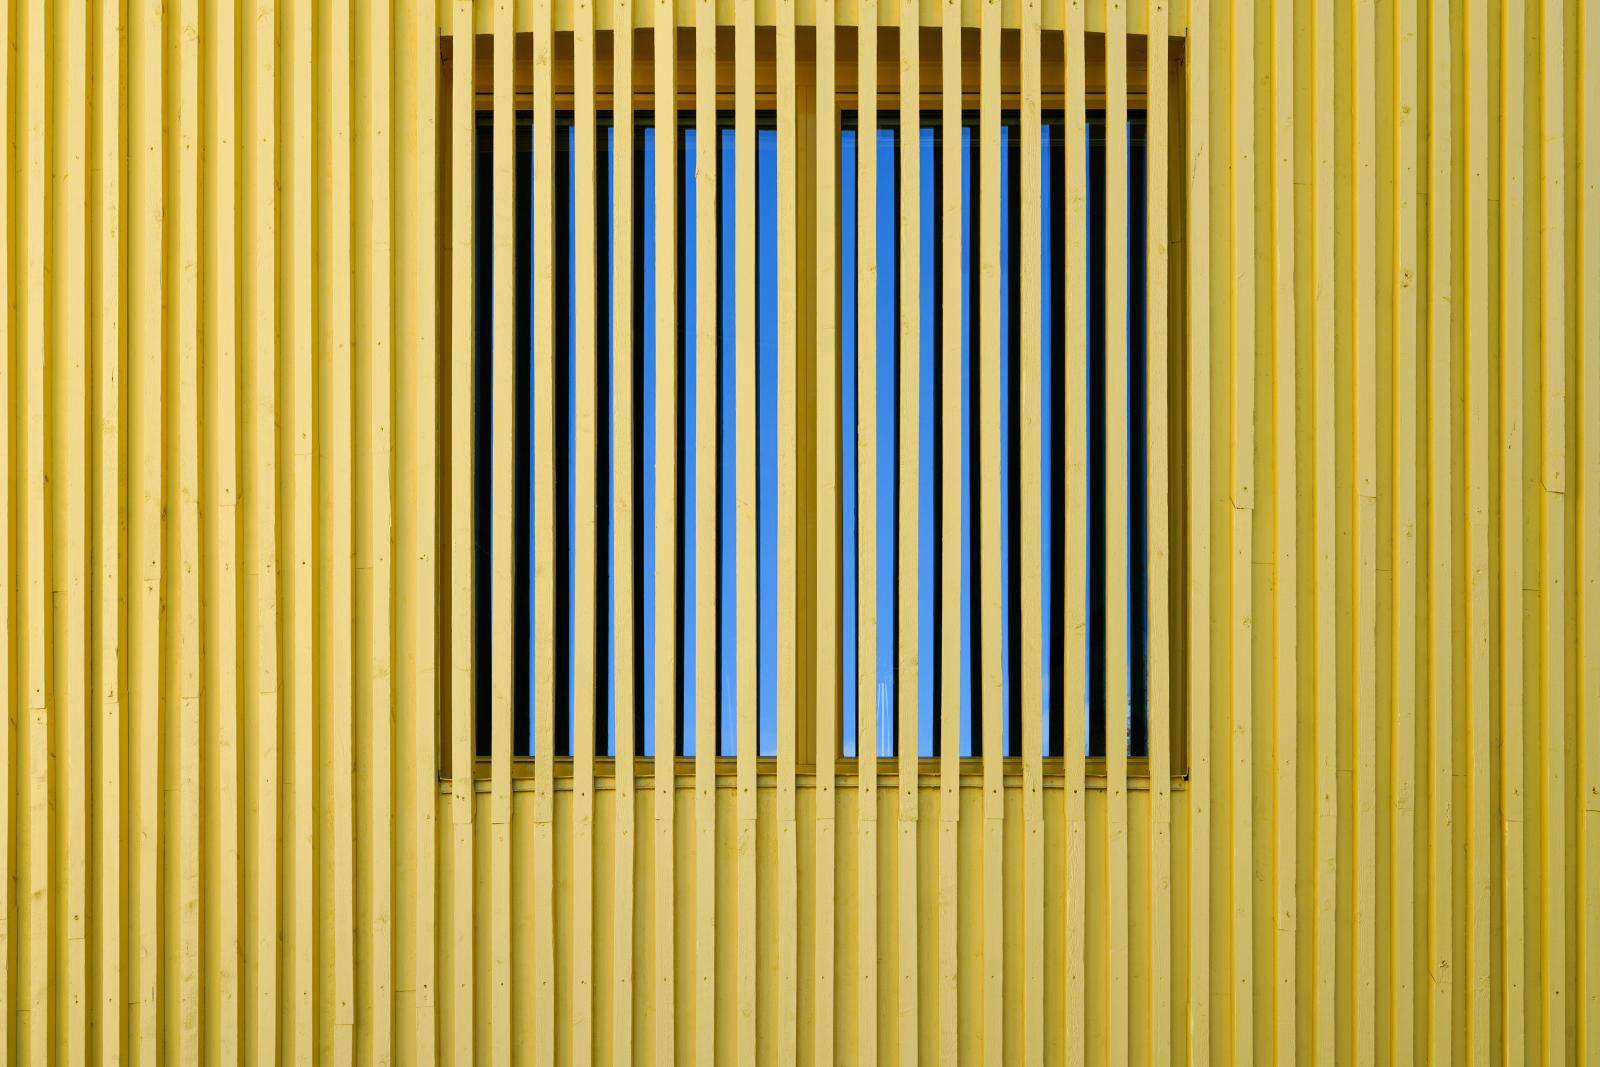 A Glimpse of Light: Yellow painted Wood meets blue Sky | Buy this image